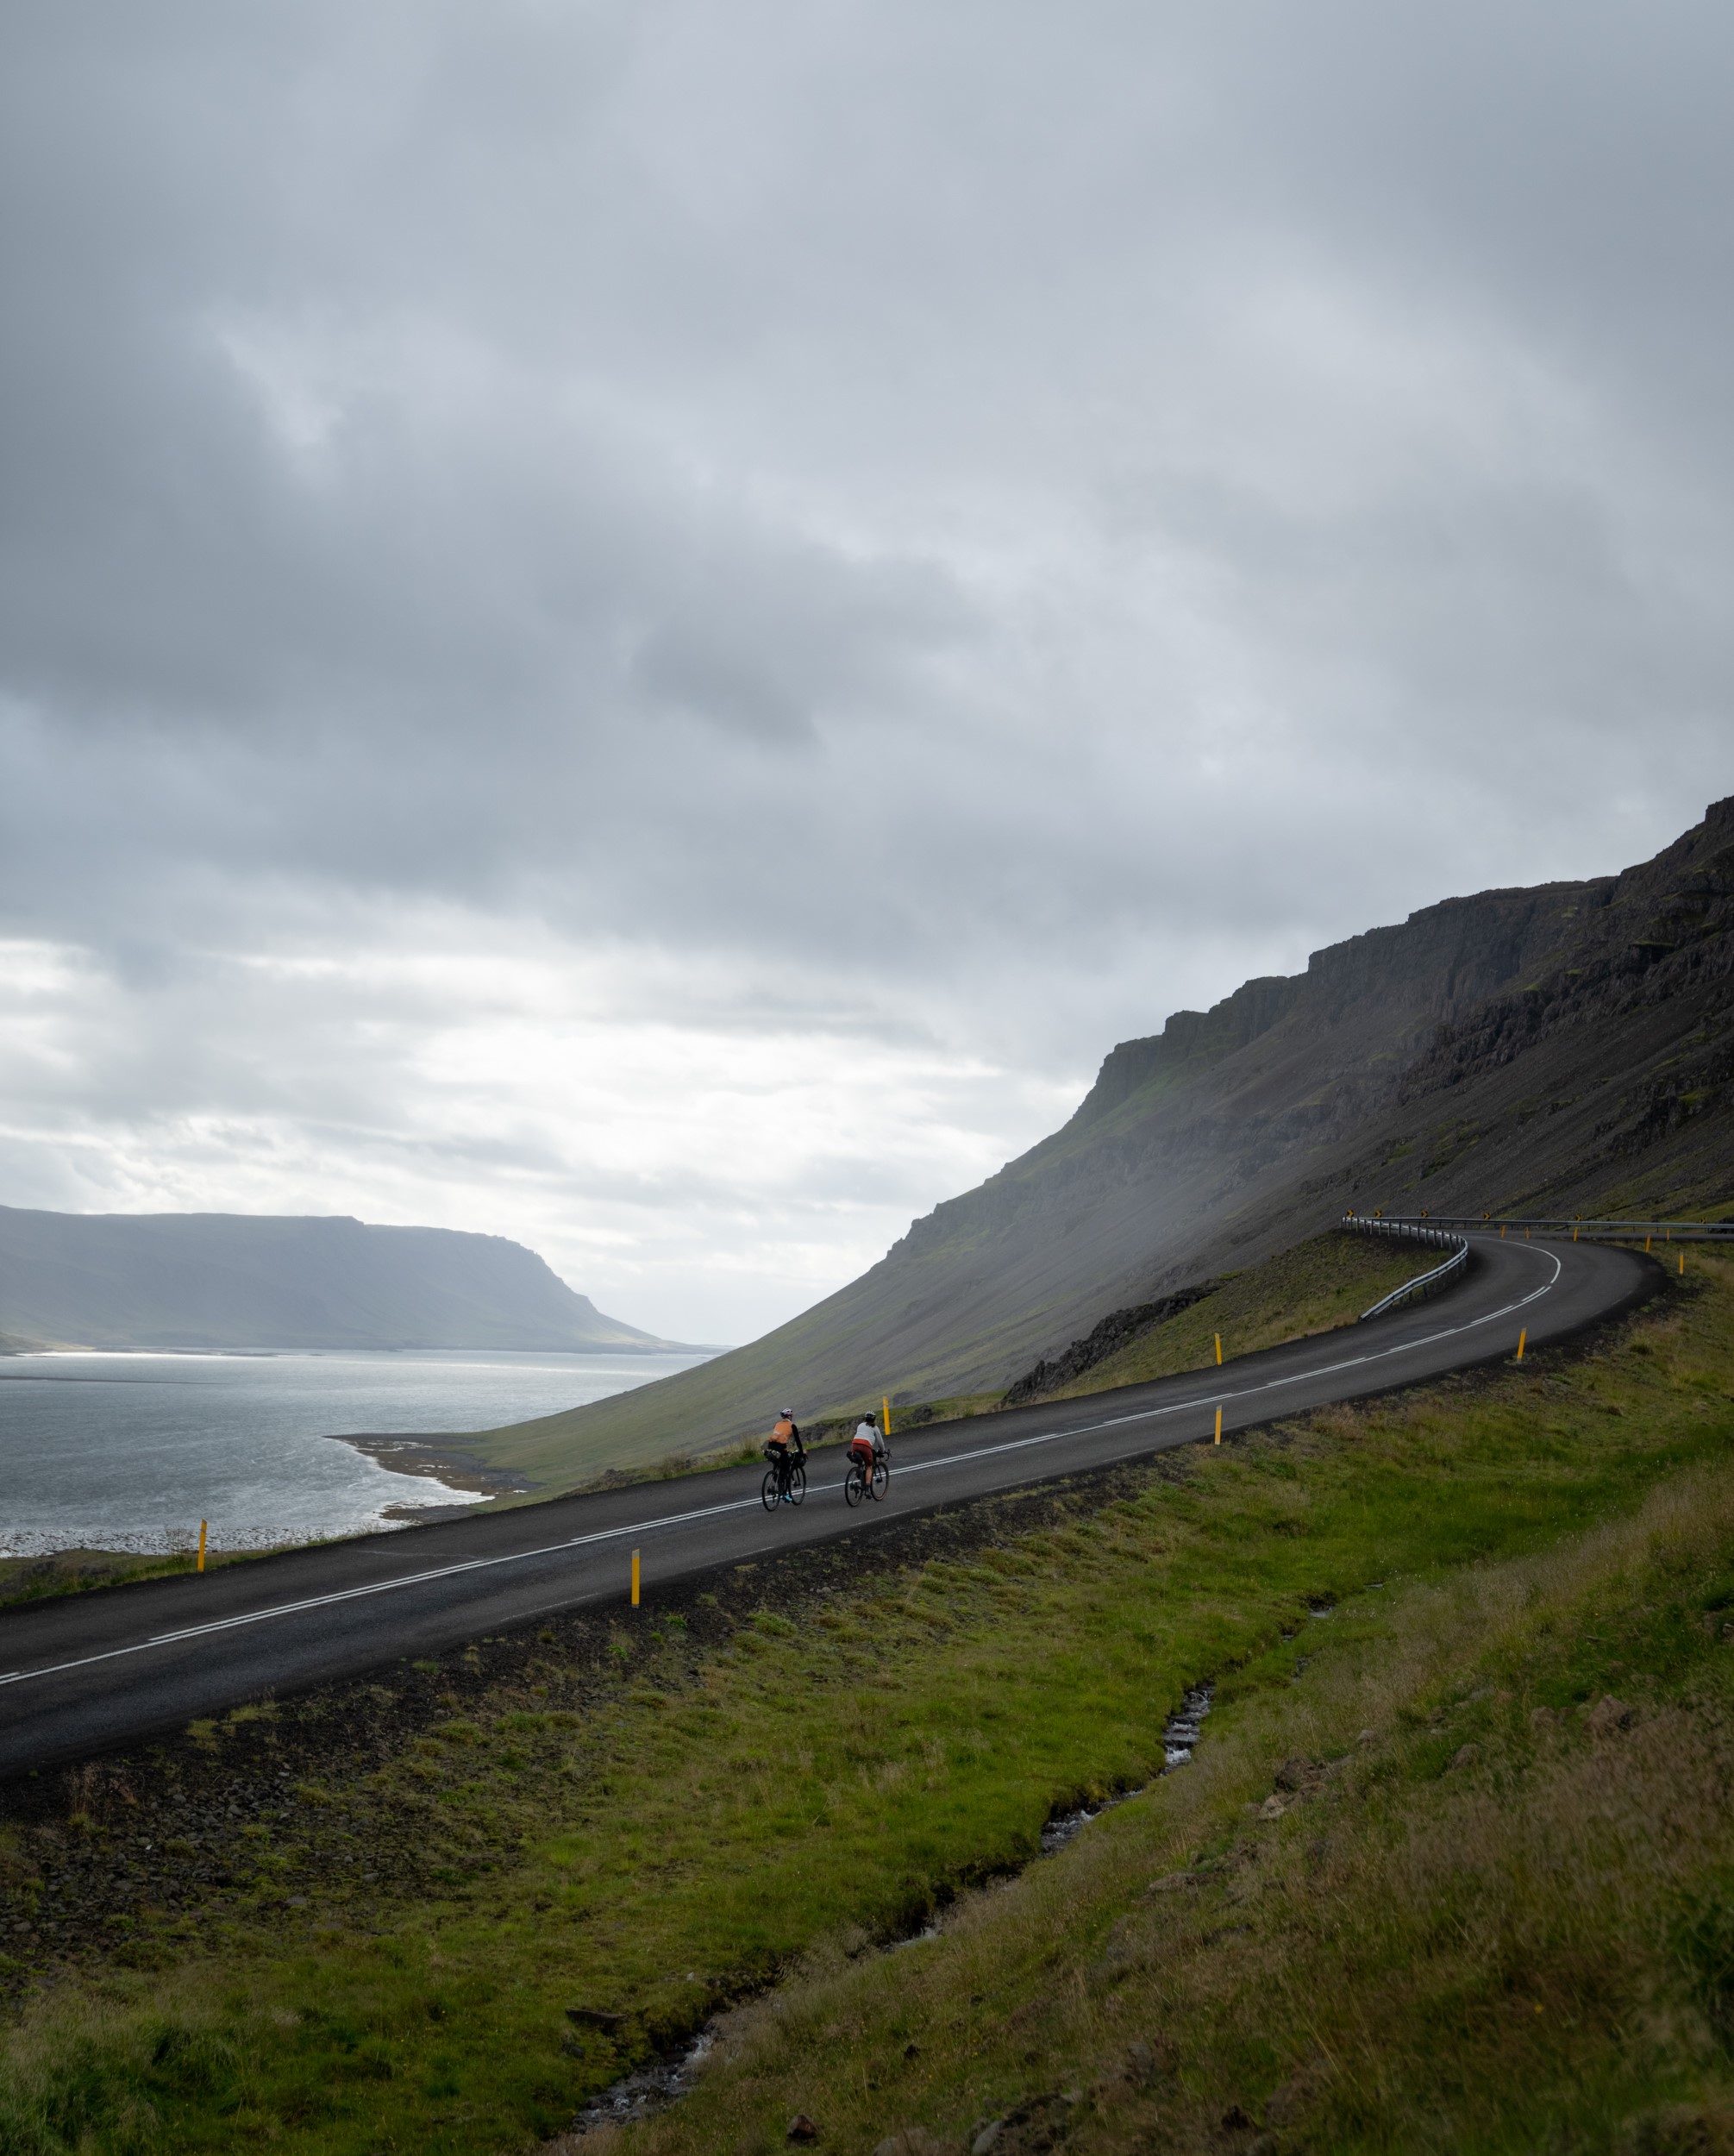 Cyclists on a mountain road in the Westfjords